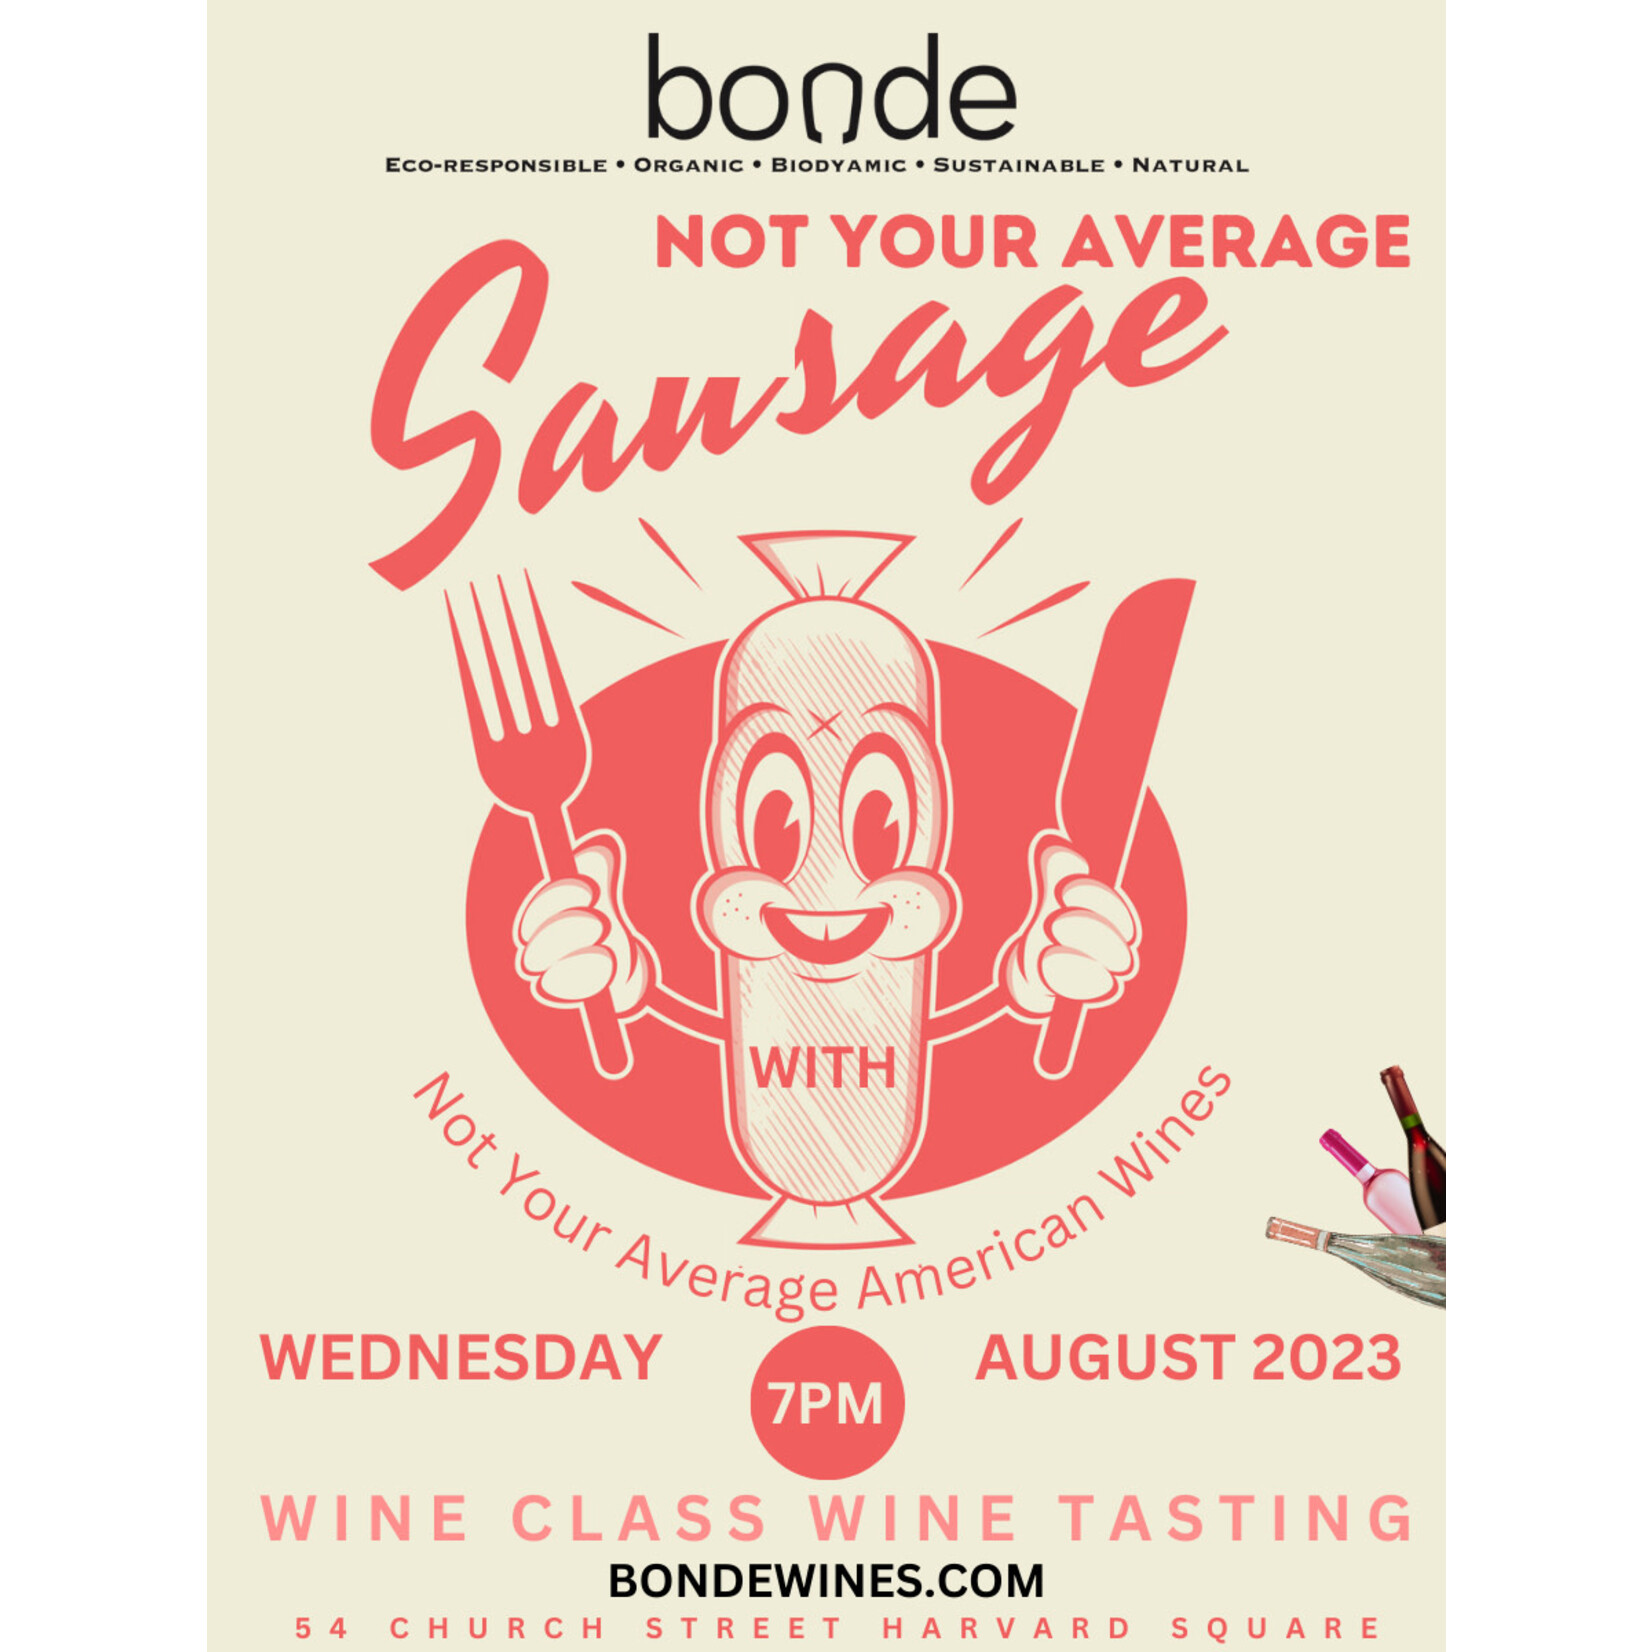 Not your average sausage & Wine - Wine Tasting & Class - Wednesday August 23, 7PM